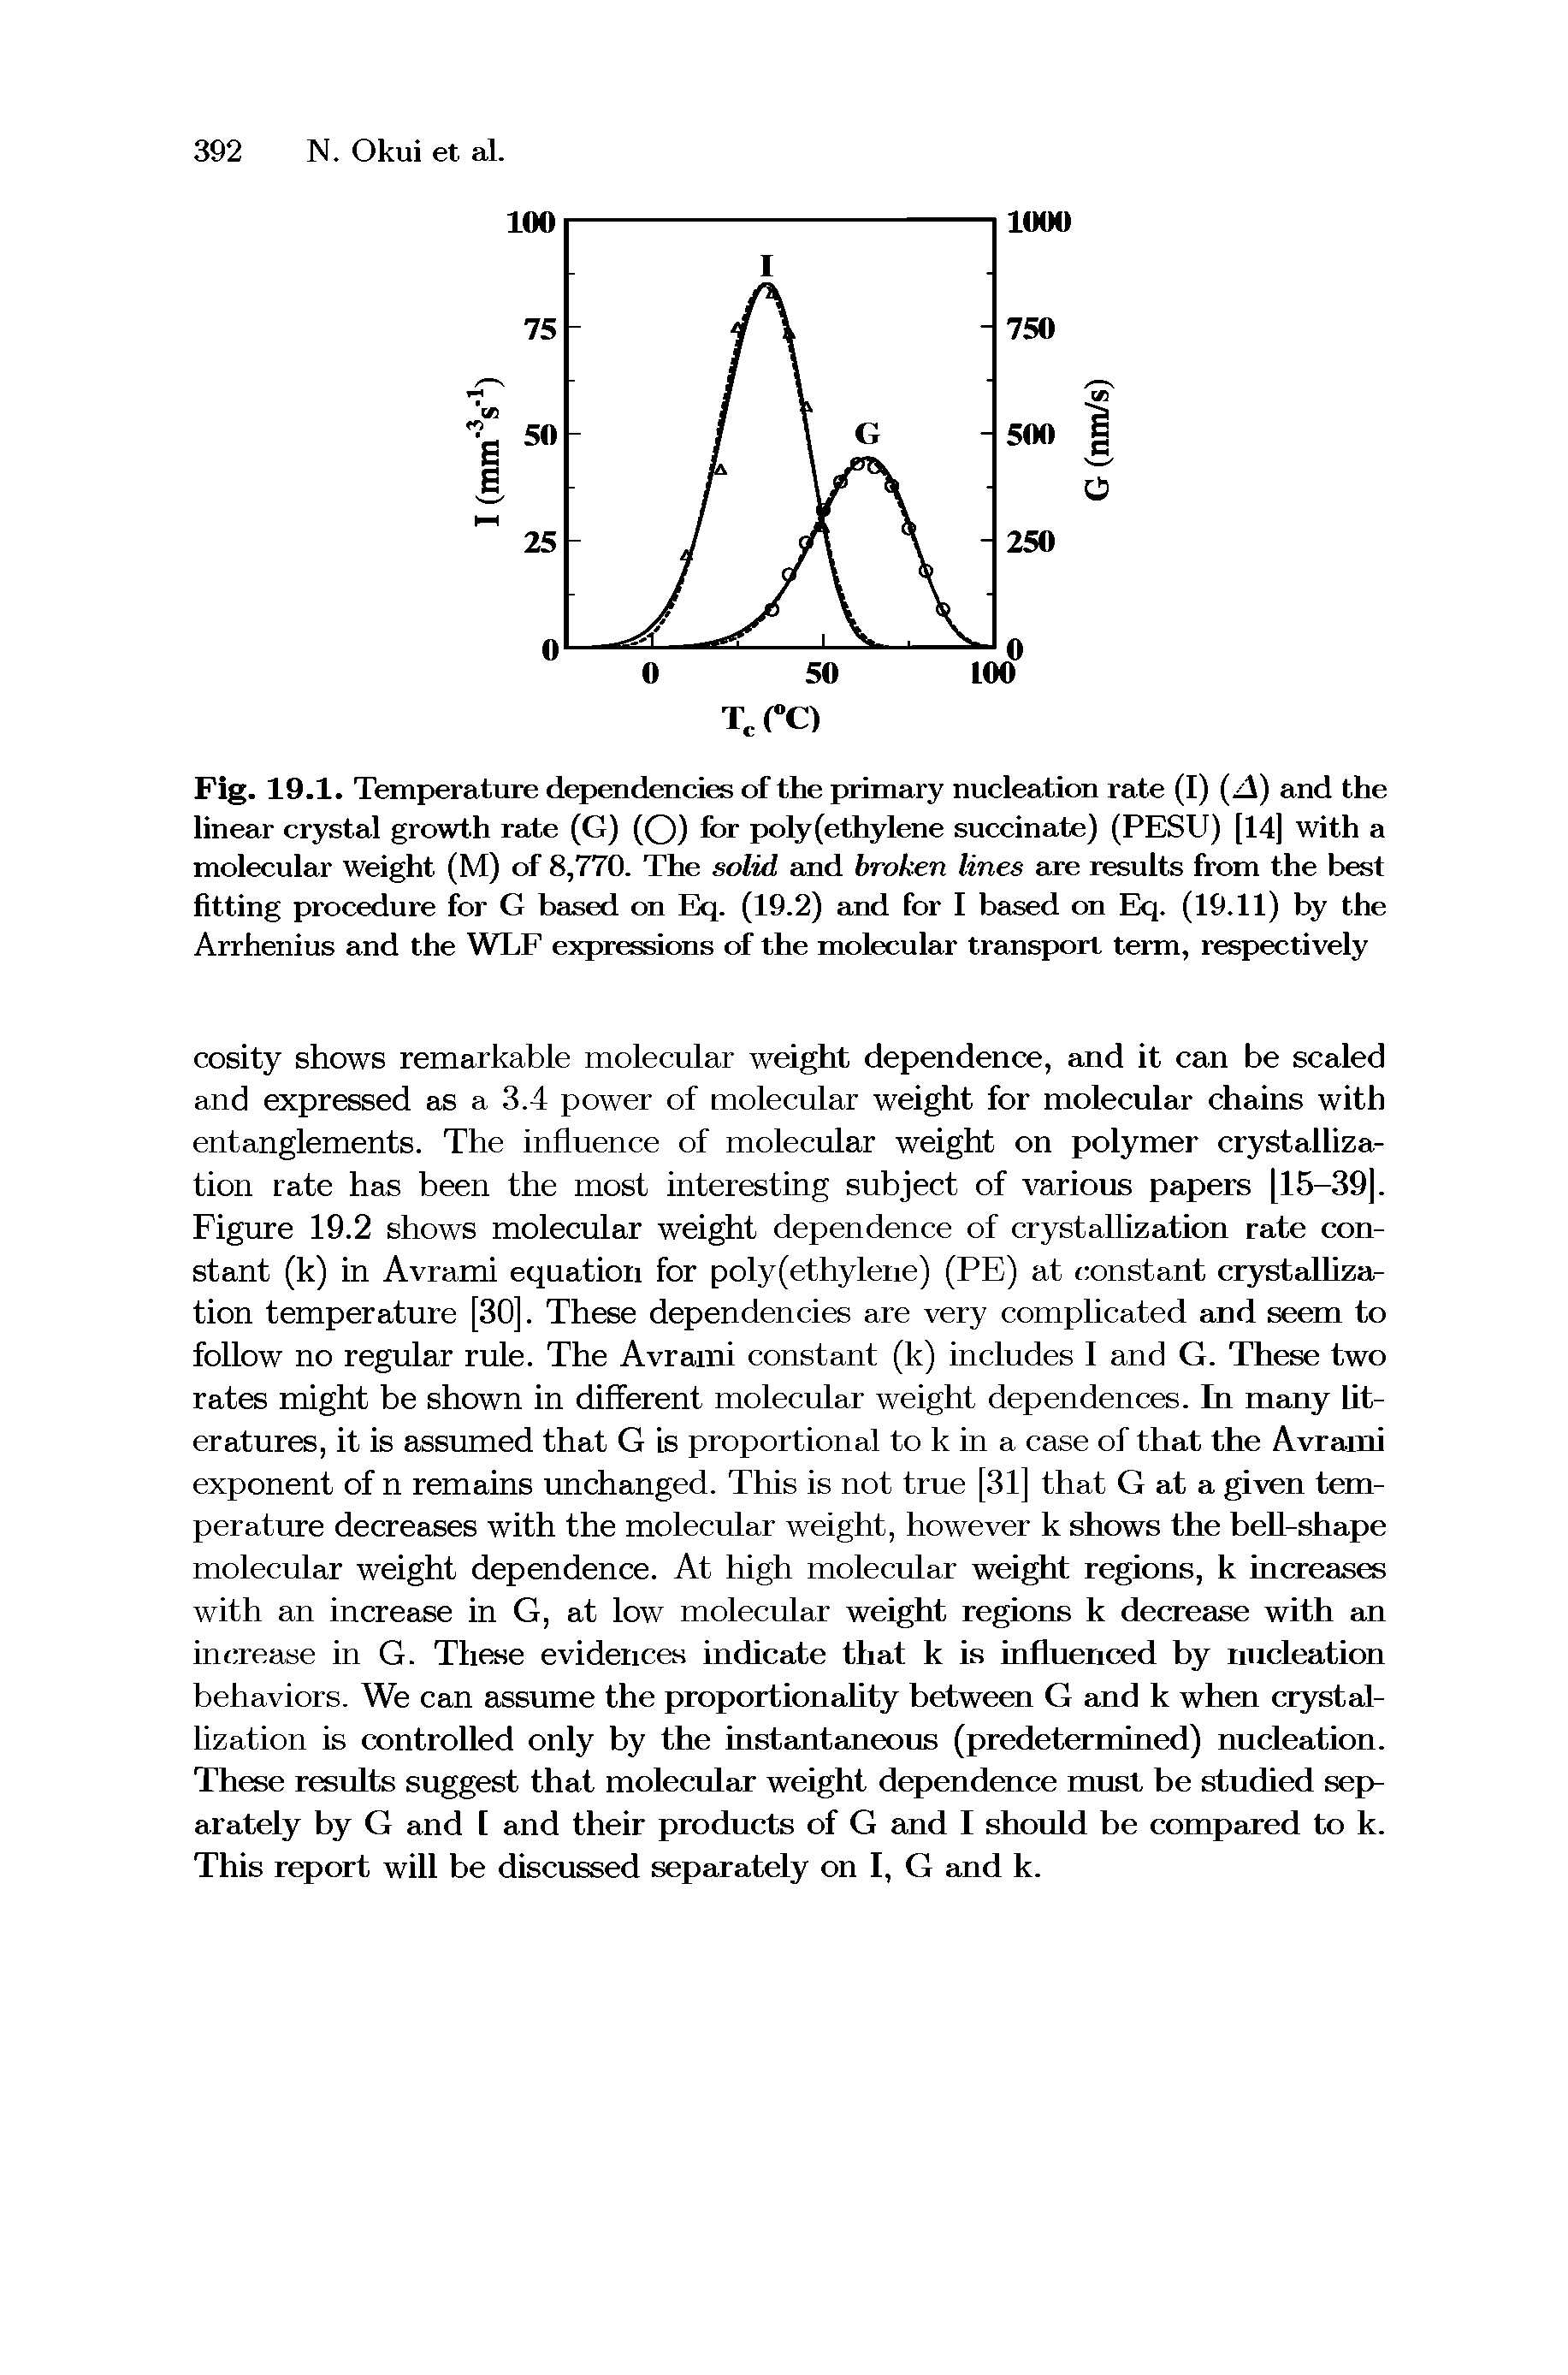 Fig. 19.1. Temperature dependencies of the primary nucleation rate (I) (A) and the linear crystal growth rate (G) (Q) for poly(ethylene succinate) (PEISU) [14] with a molecular weight (M) of 8,770. The solid and broken lines are results from the best fitting procedure for G based on Eq. (19.2) and for I based on Exj. (19.11) by the Arrhenius and the WLF expressions of the molecular transport term, respectively...